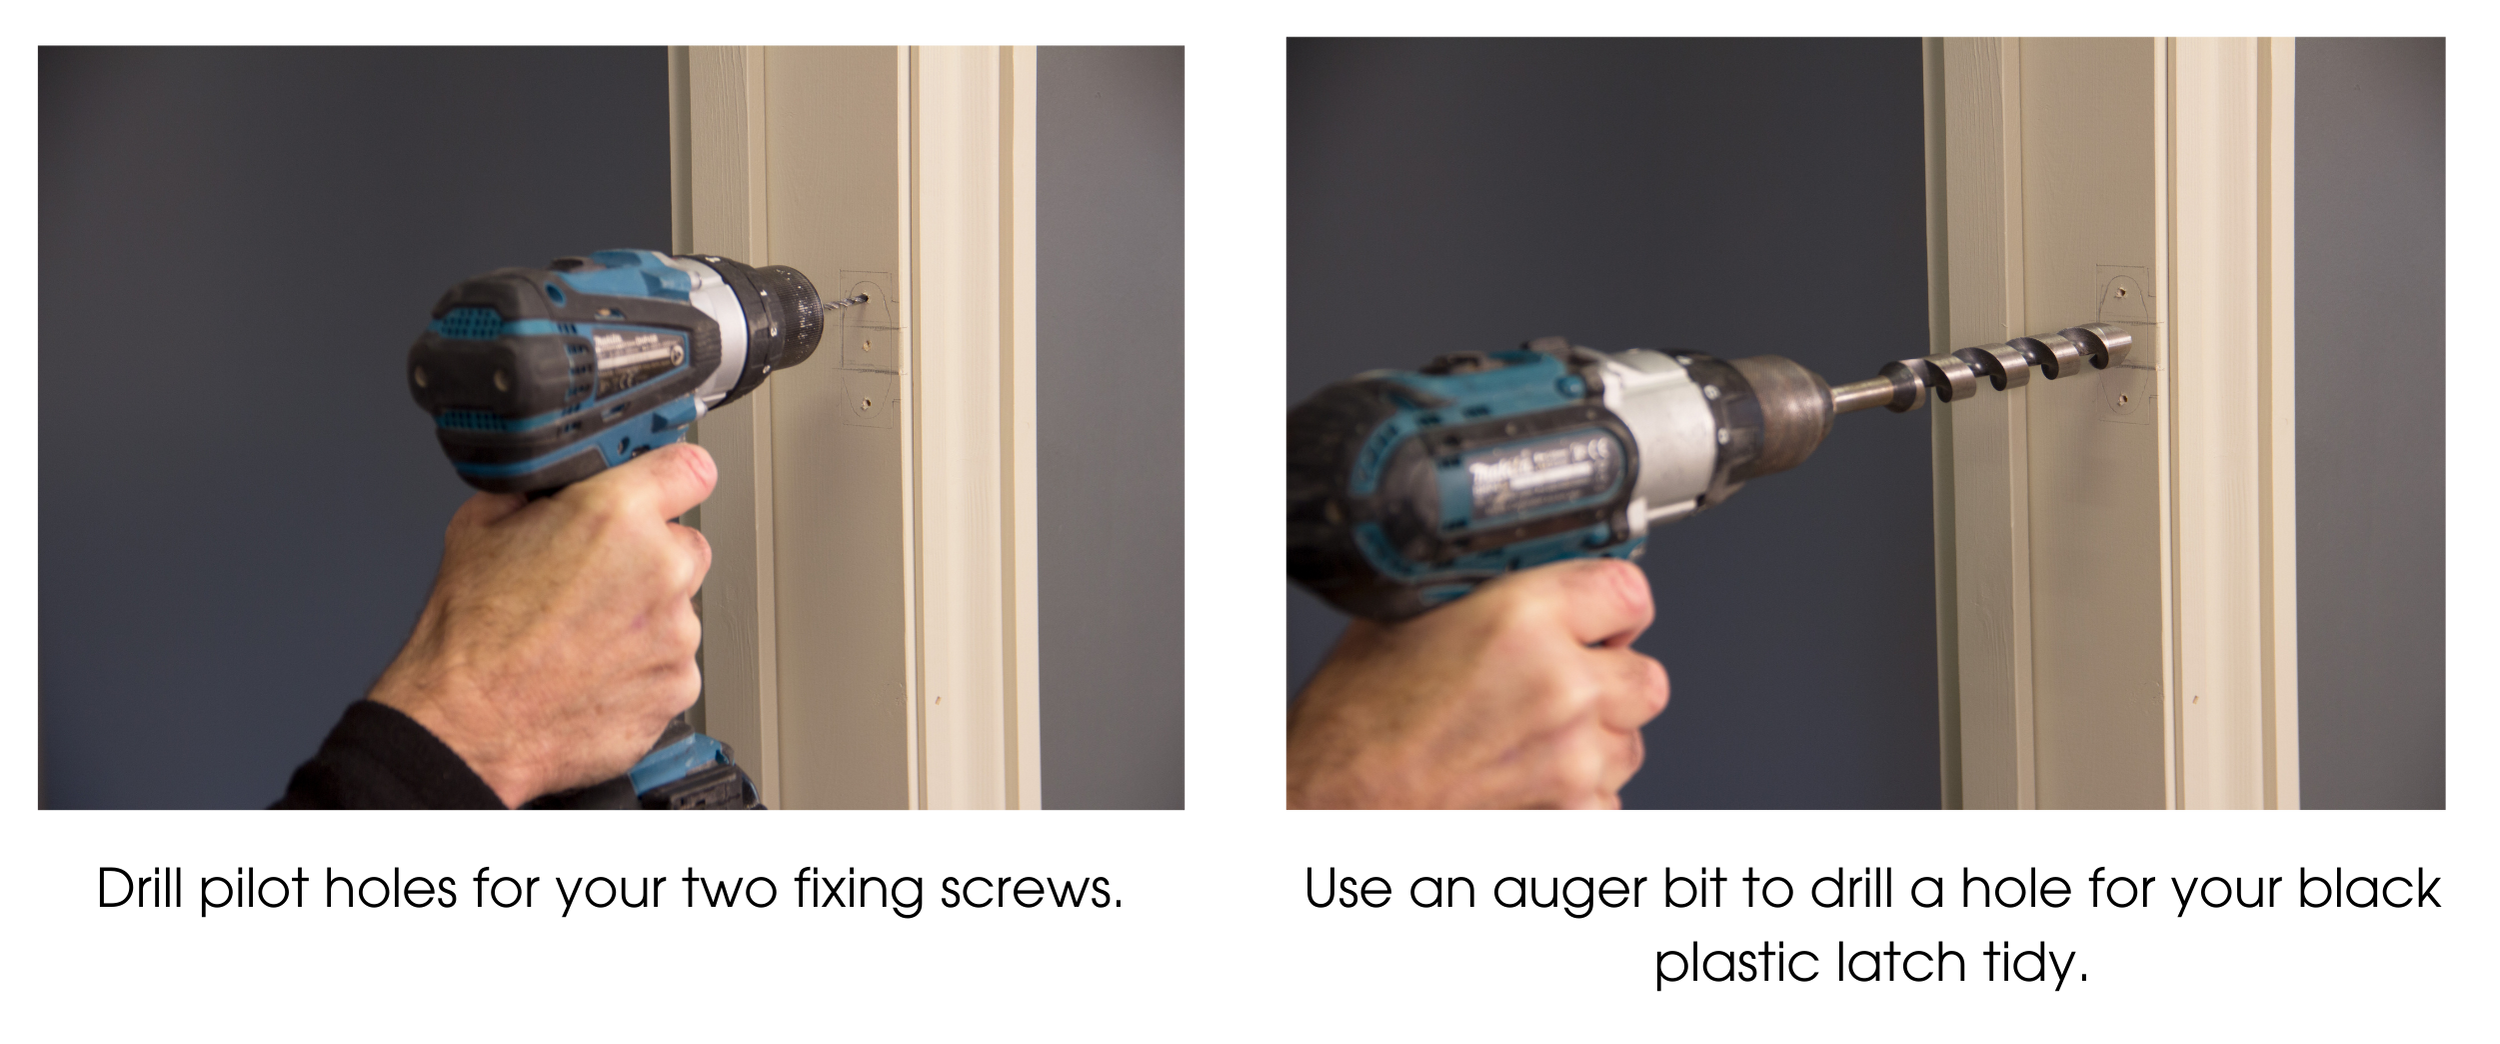 Person using a drill to drill pilot holes into the frame of a door, and using an auger bit to drill a hole for a mortice latch.